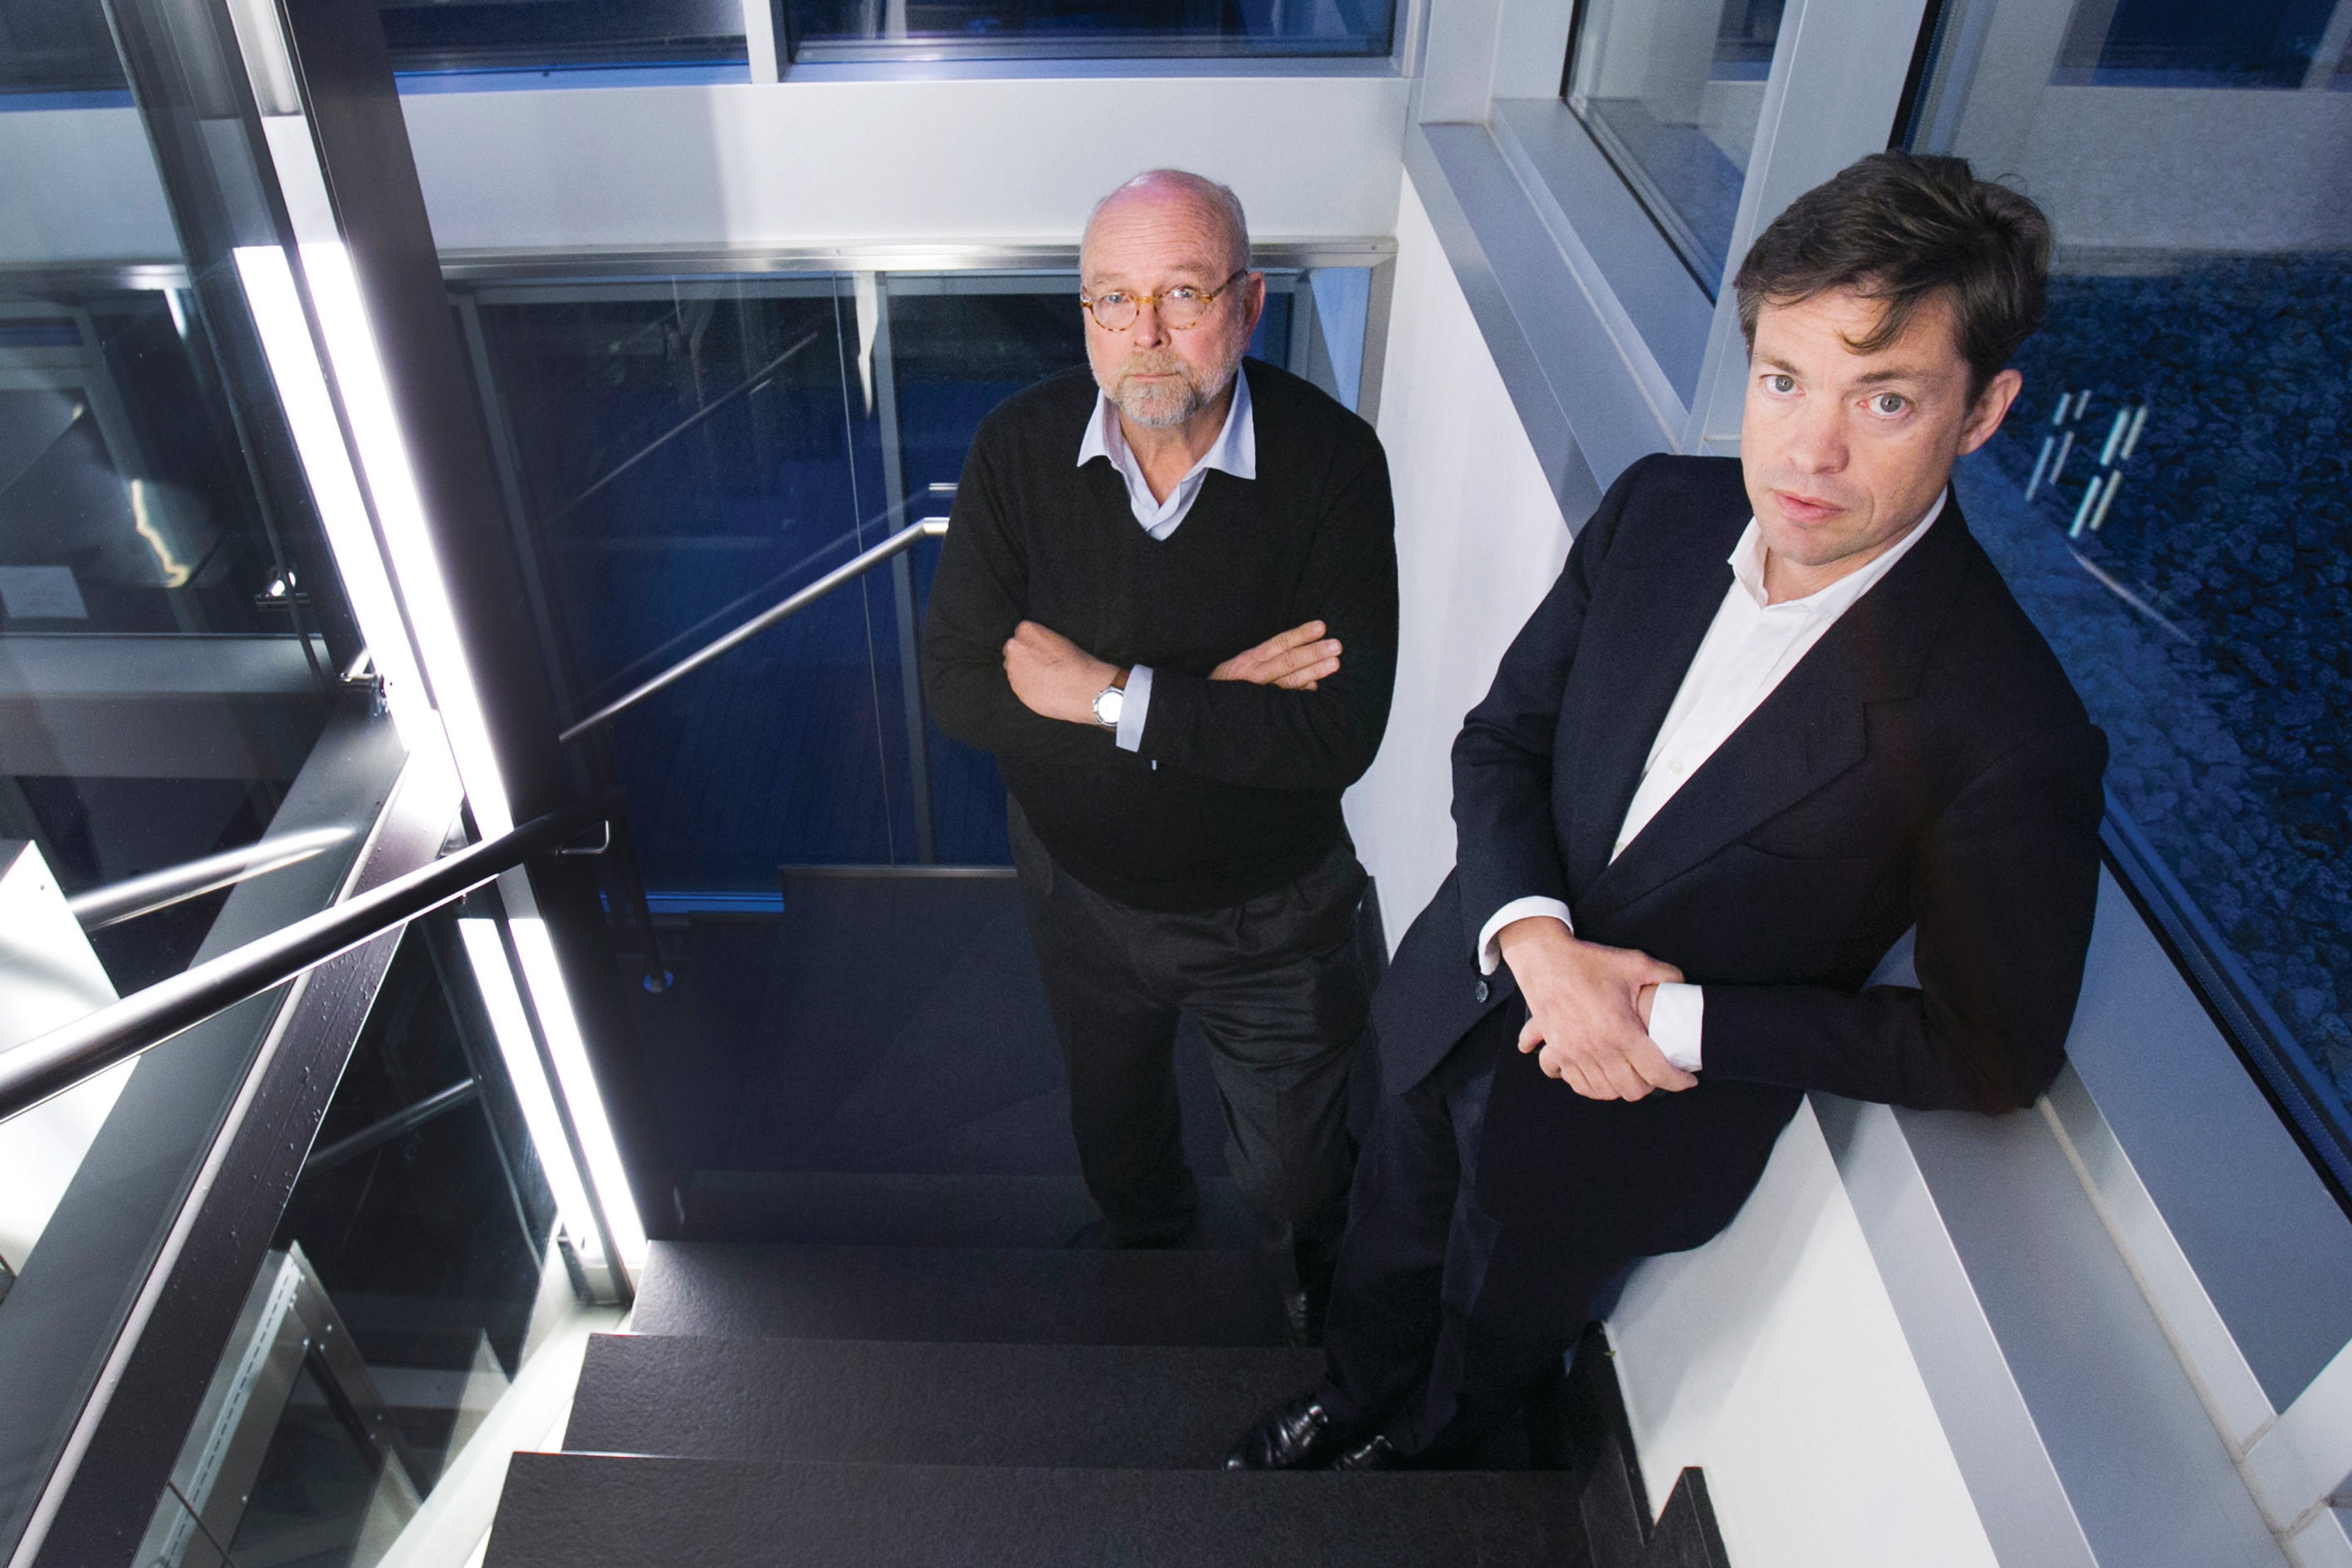 Nathan Gardels and Nicolas Berggruen standing in a stairwell